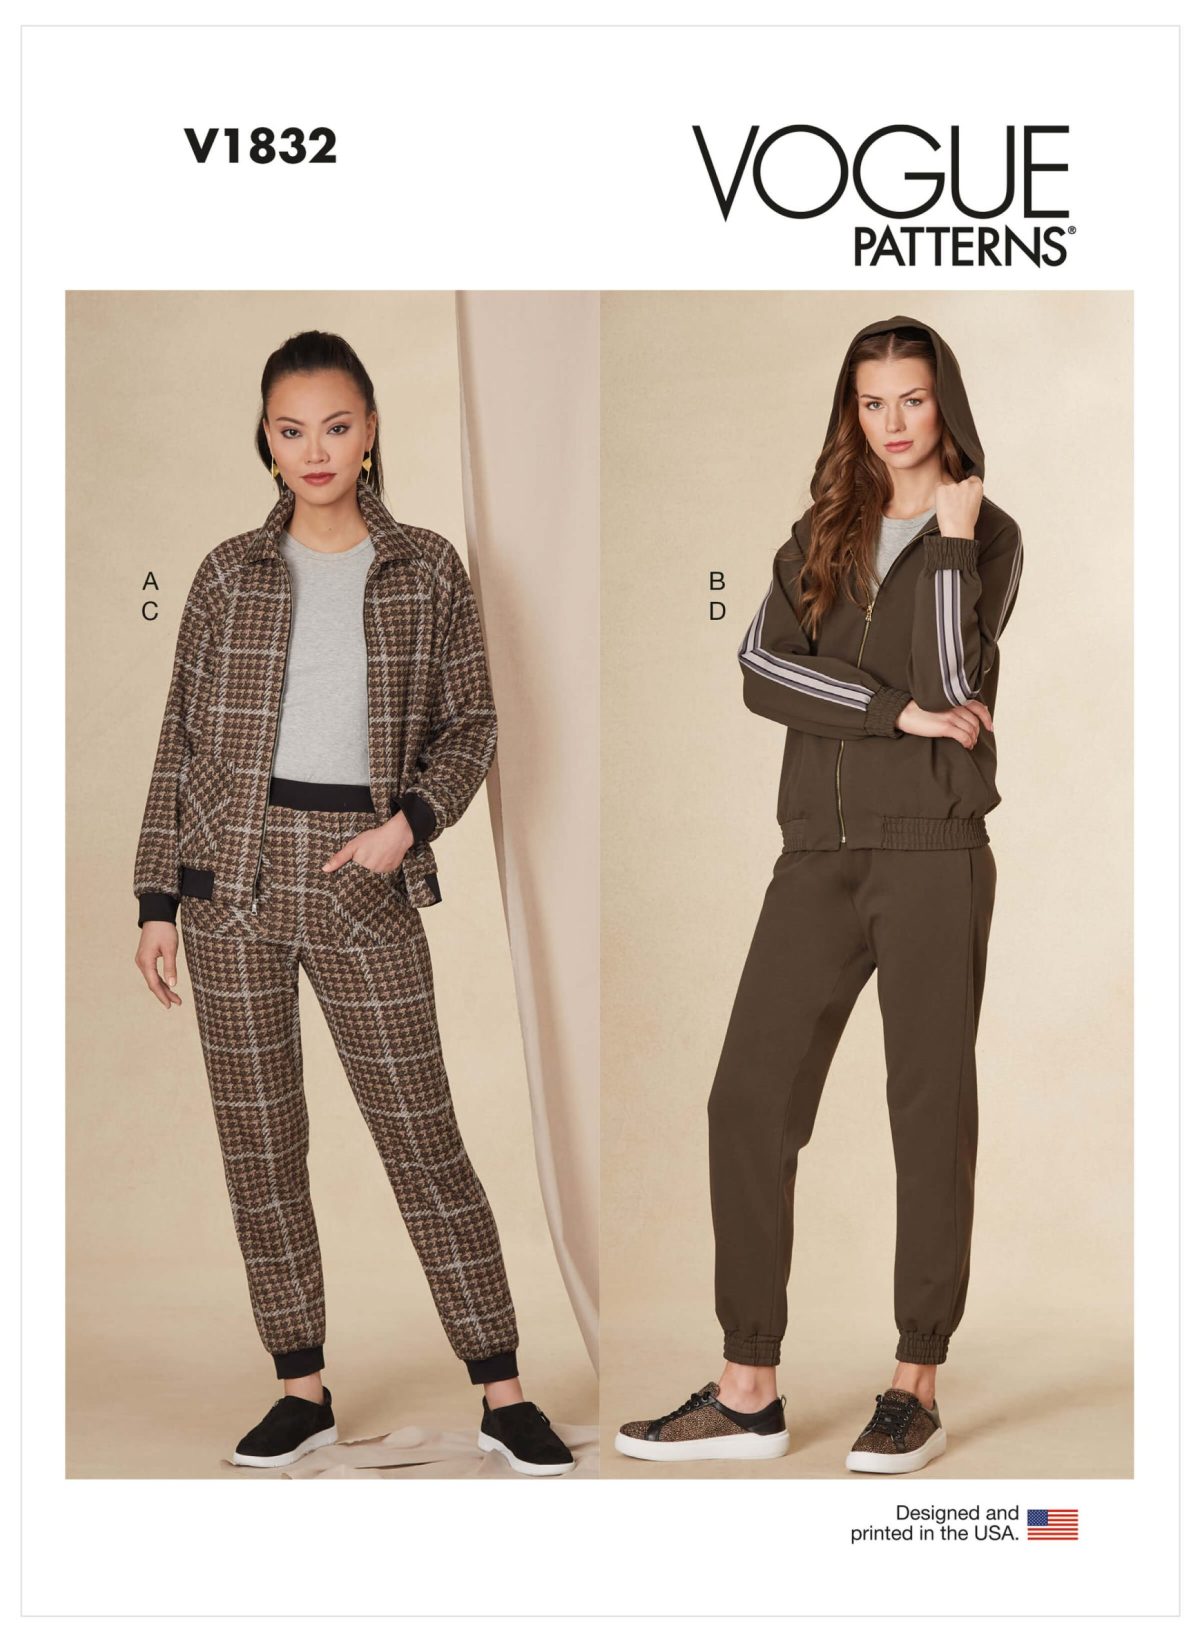 Vogue Patterns V1832 Misses' and Misses' Petite Jacket and Trousers